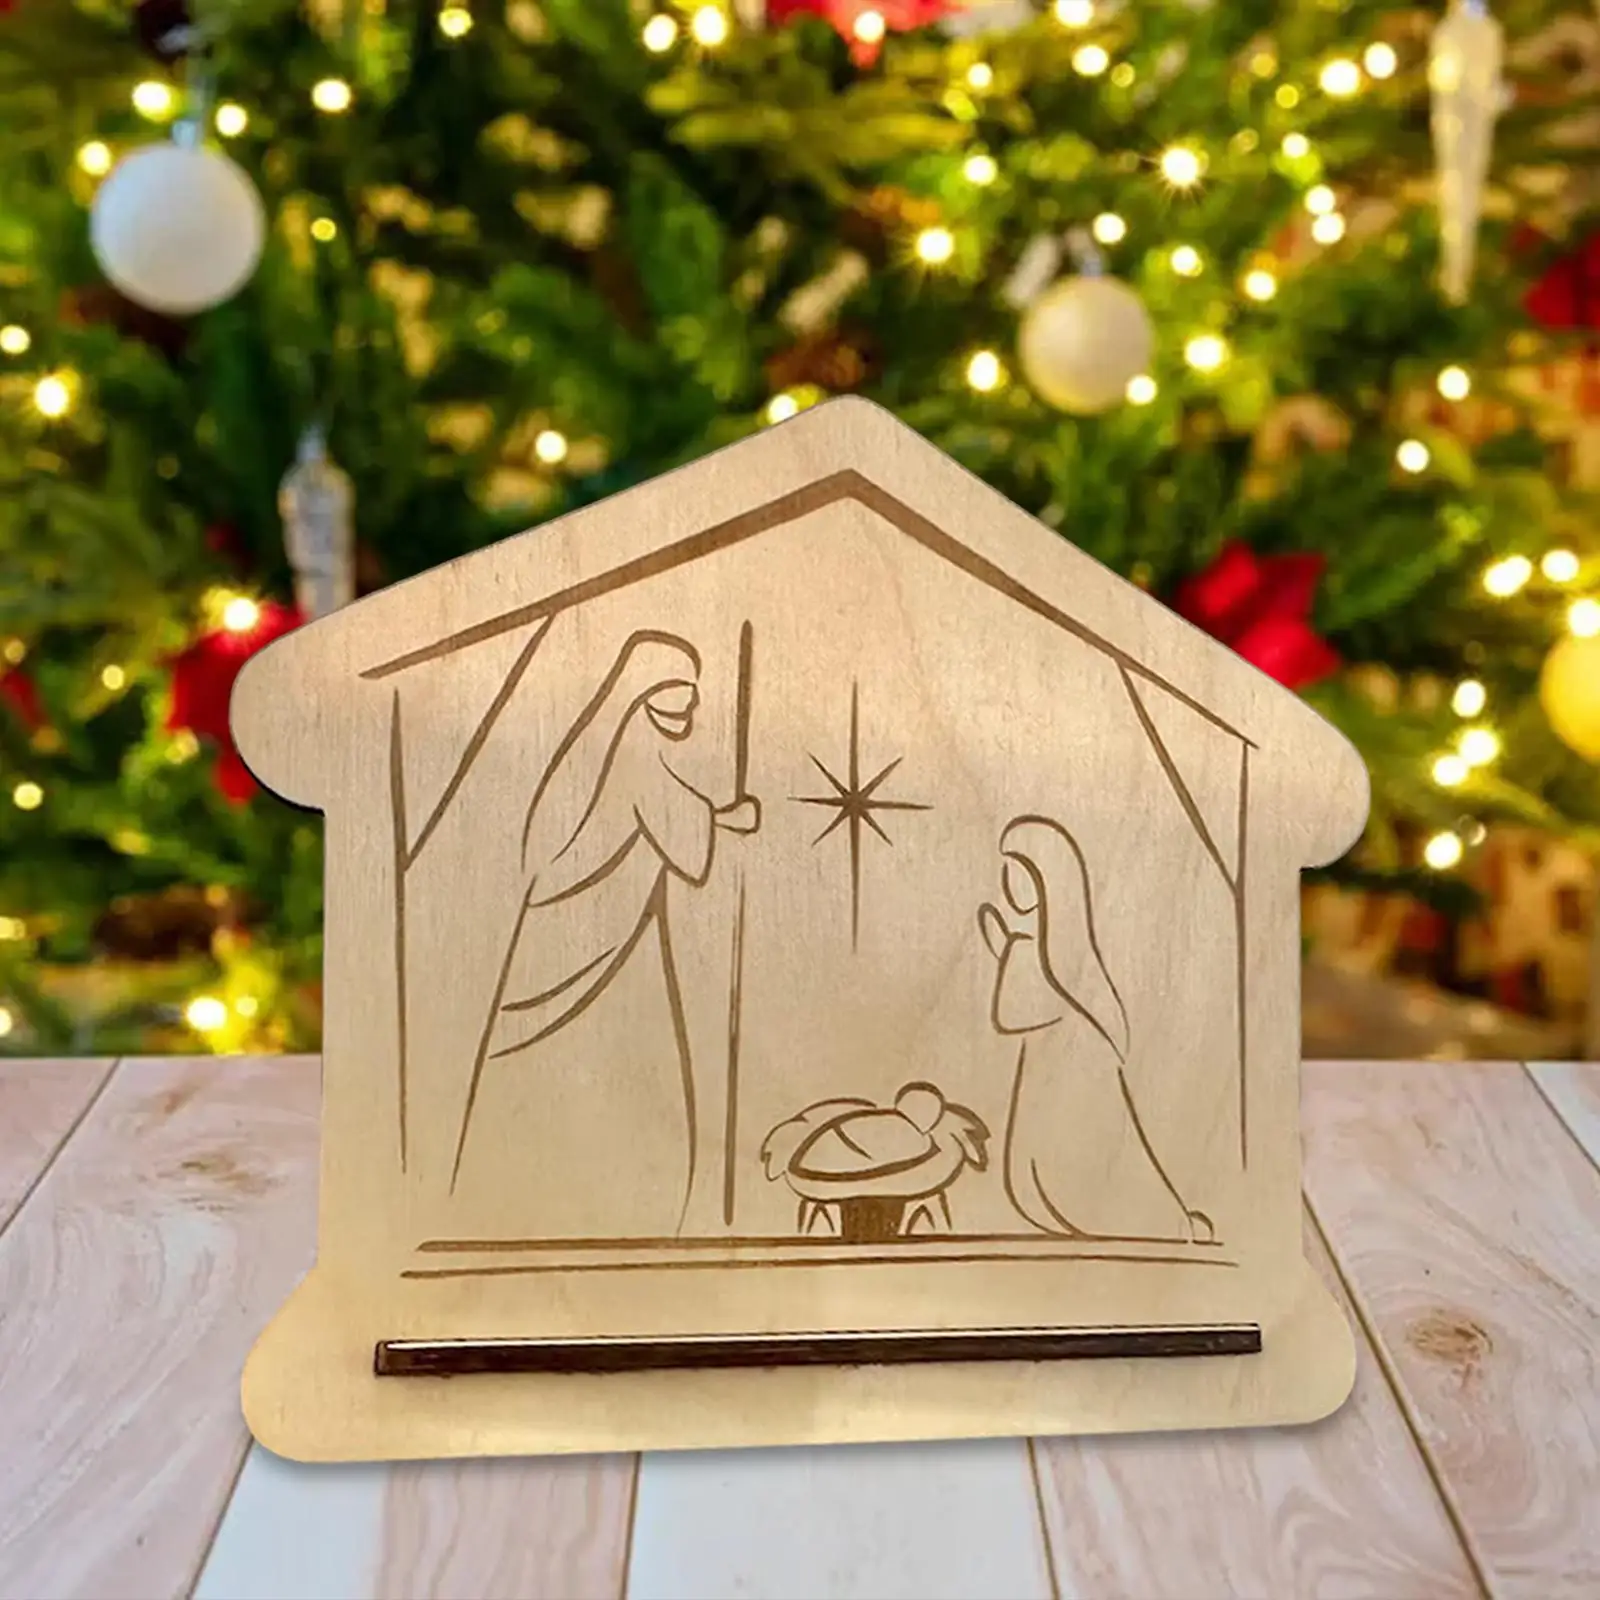 The Birth of Jesus Decorations Xmas Decor for Family Table Centerpiece Home